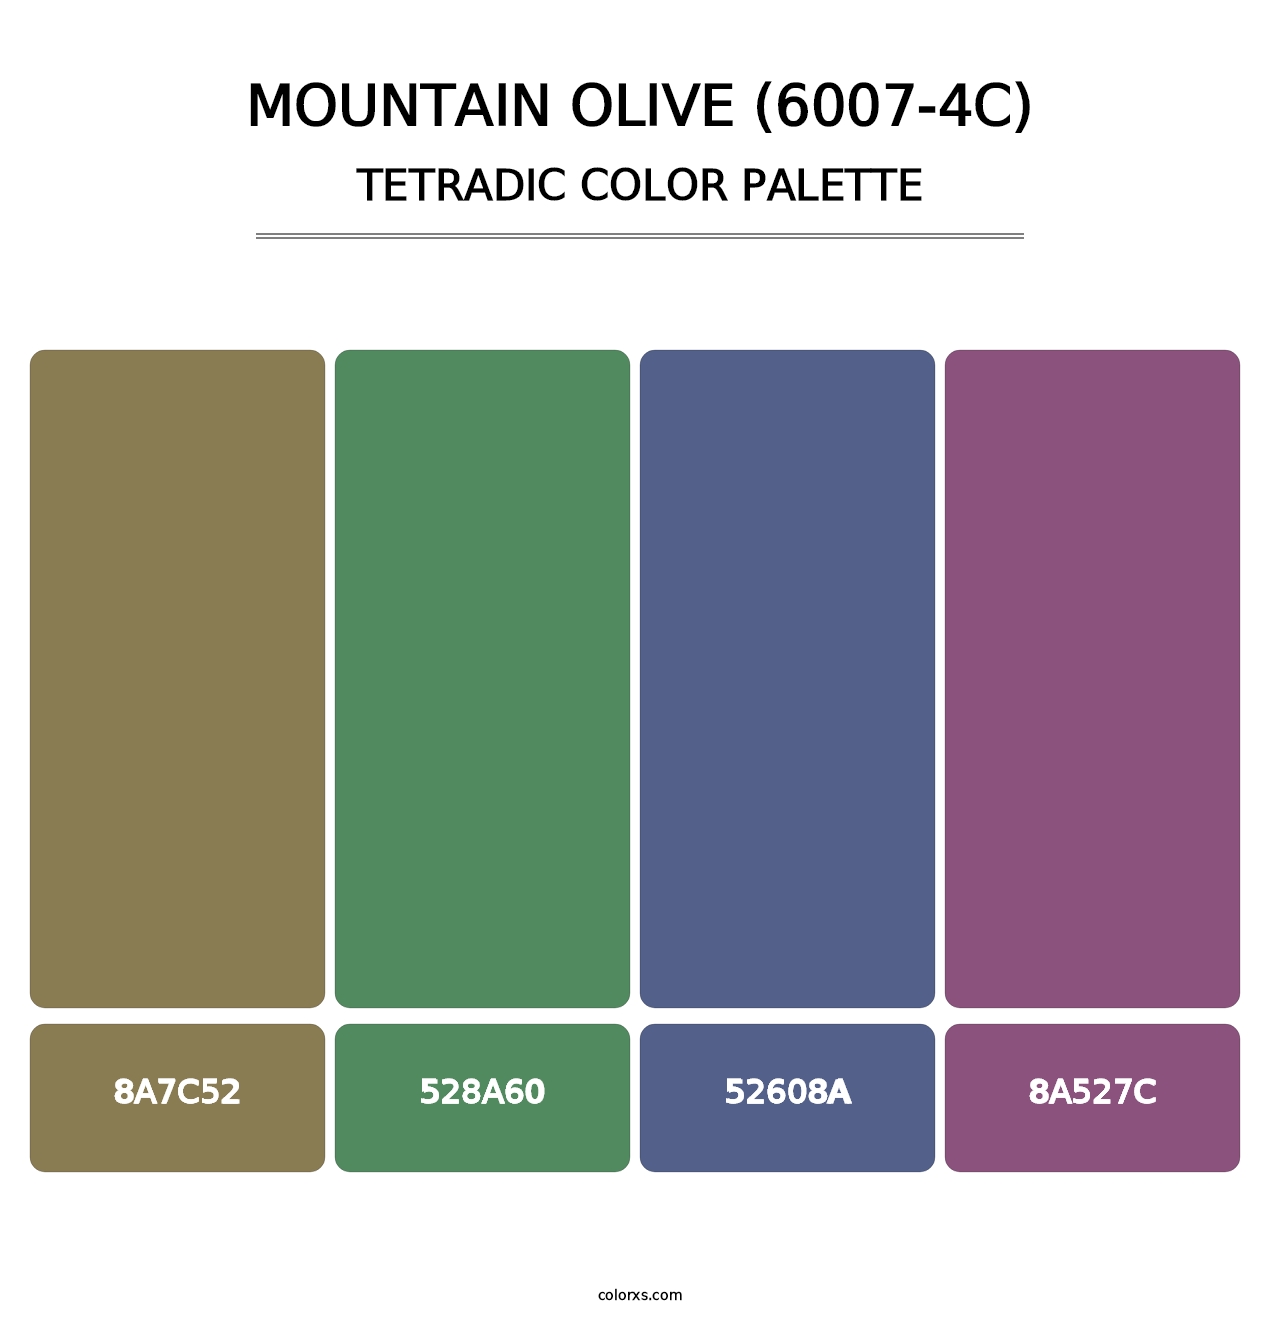 Mountain Olive (6007-4C) - Tetradic Color Palette